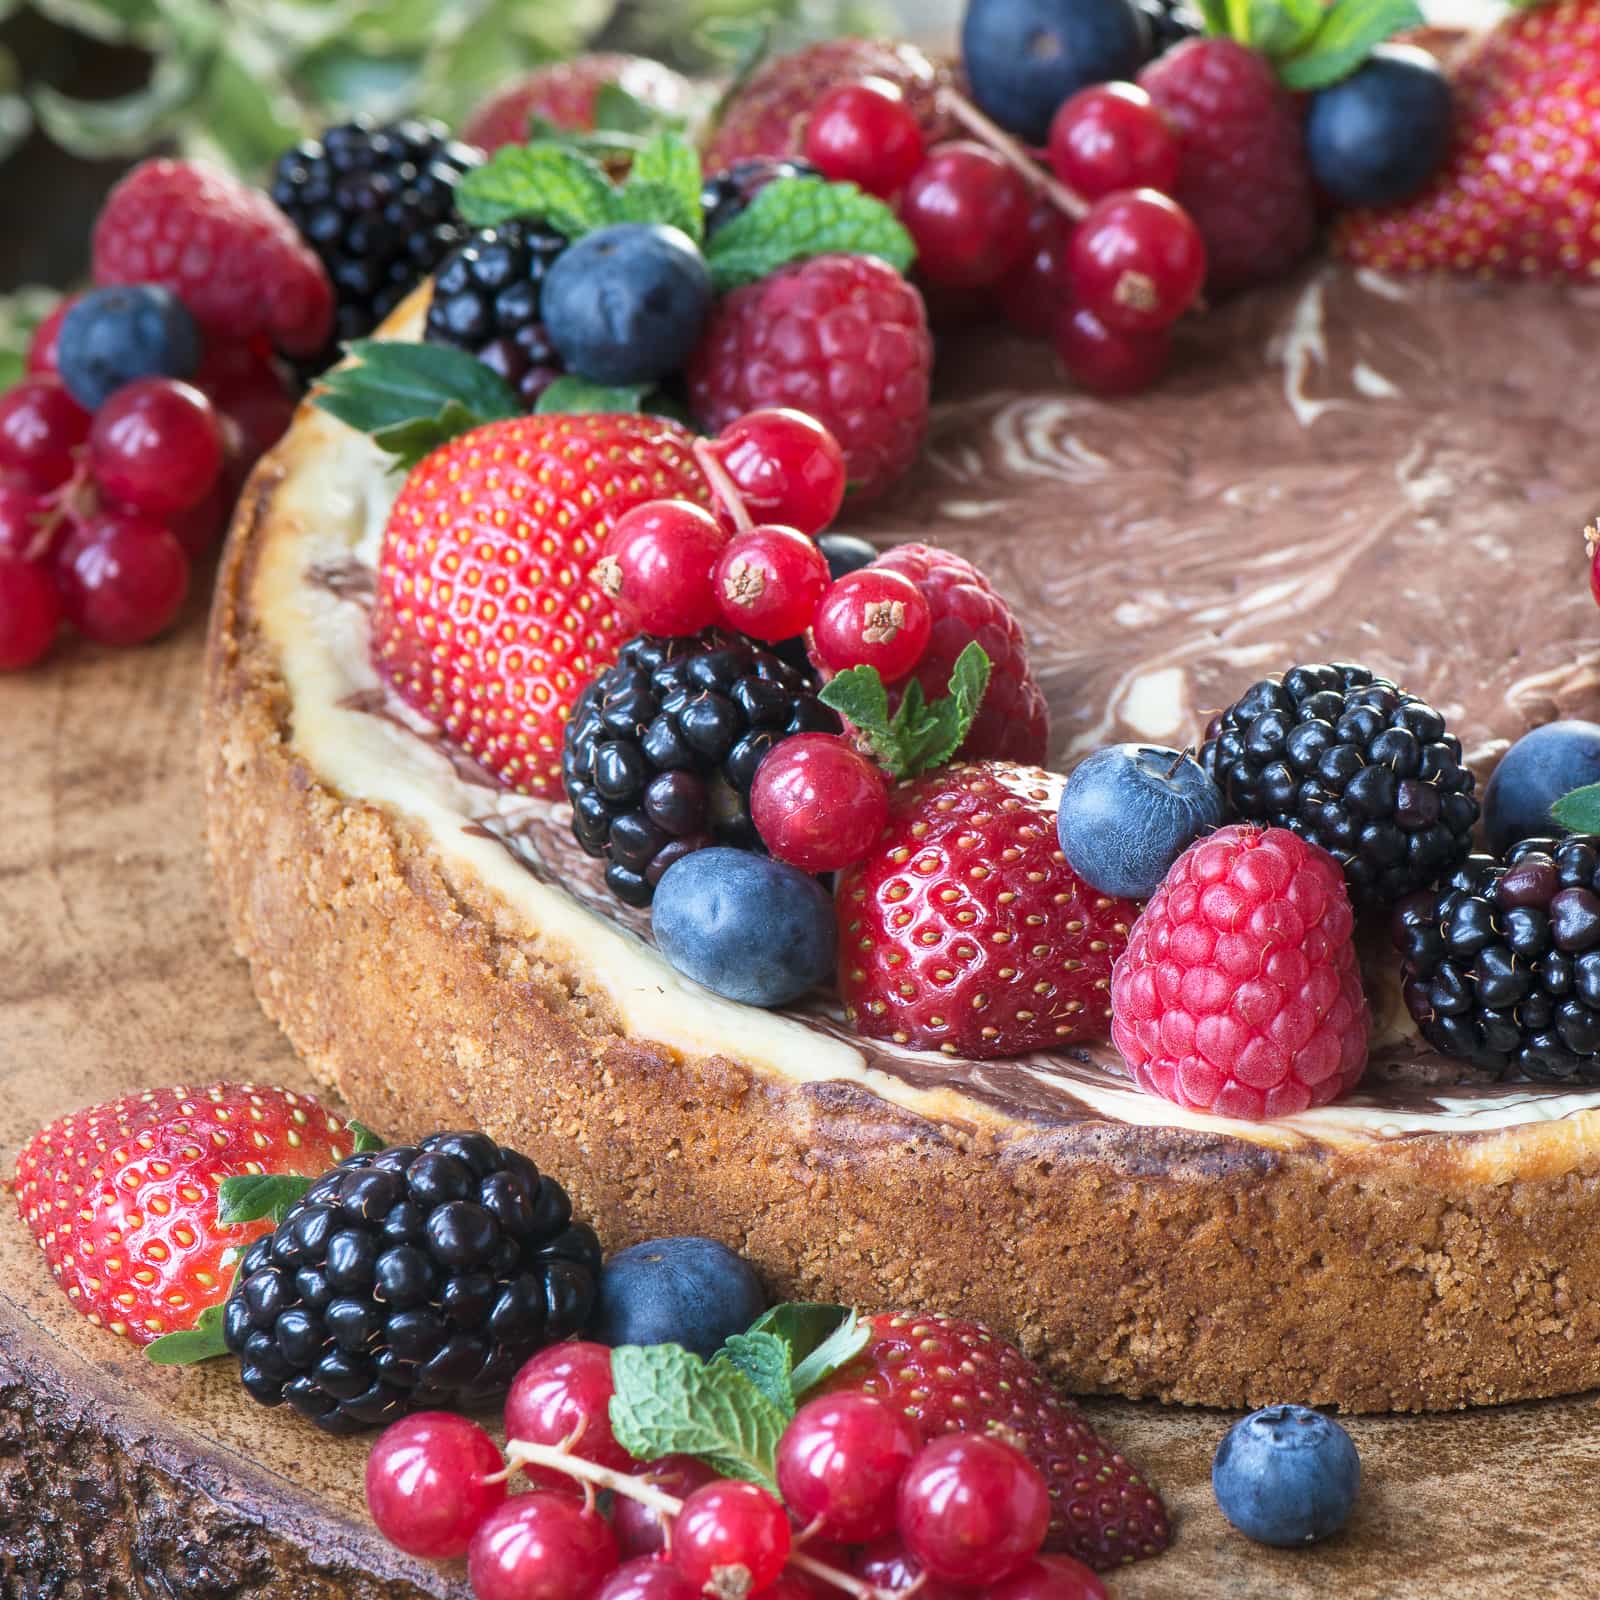 Baked chocolate marble cheesecake topped with fresh fruit.